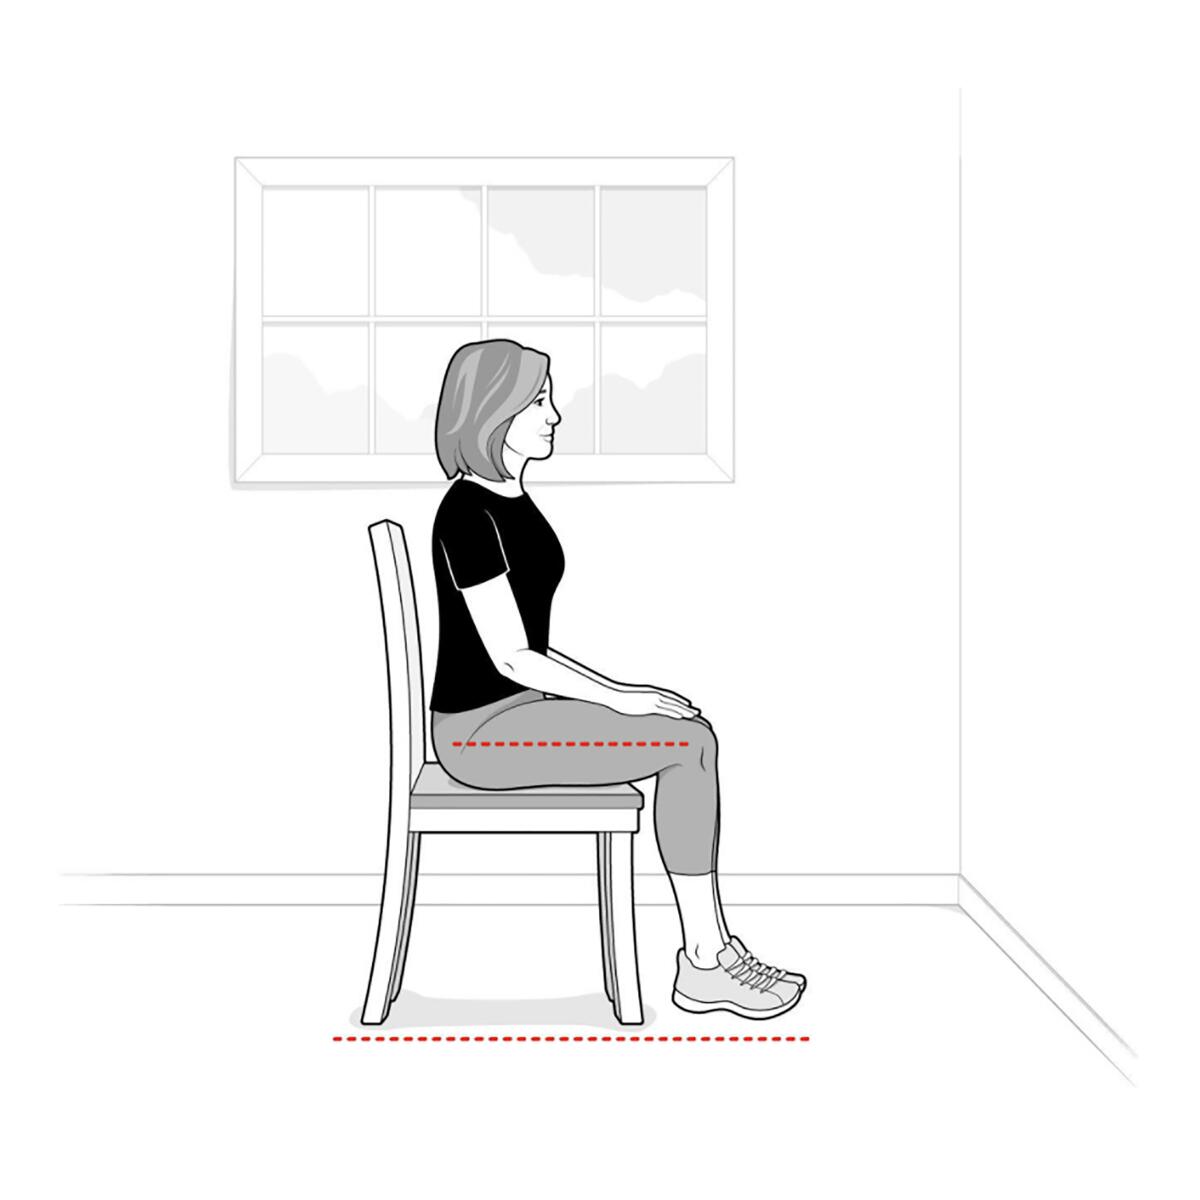 A sketch of a woman sitting in a chair with her thighs parallel with the ground.